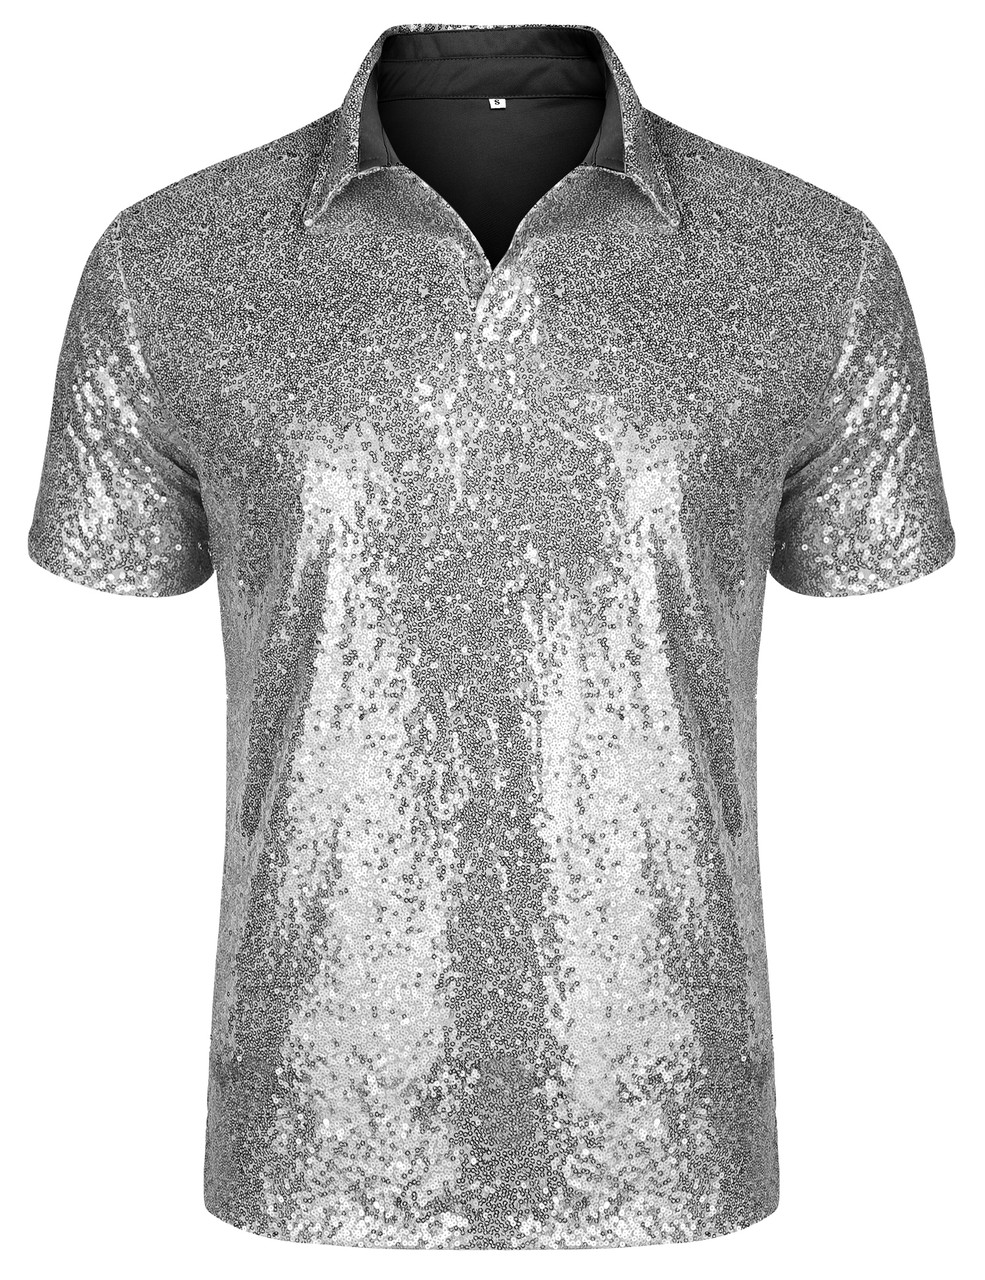 adviicd Sun Protection Shirts for Men Men's Relaxed Short Sleeve TurnDown  Sparkle Sequins Polo Shirts T-Shirts Tops